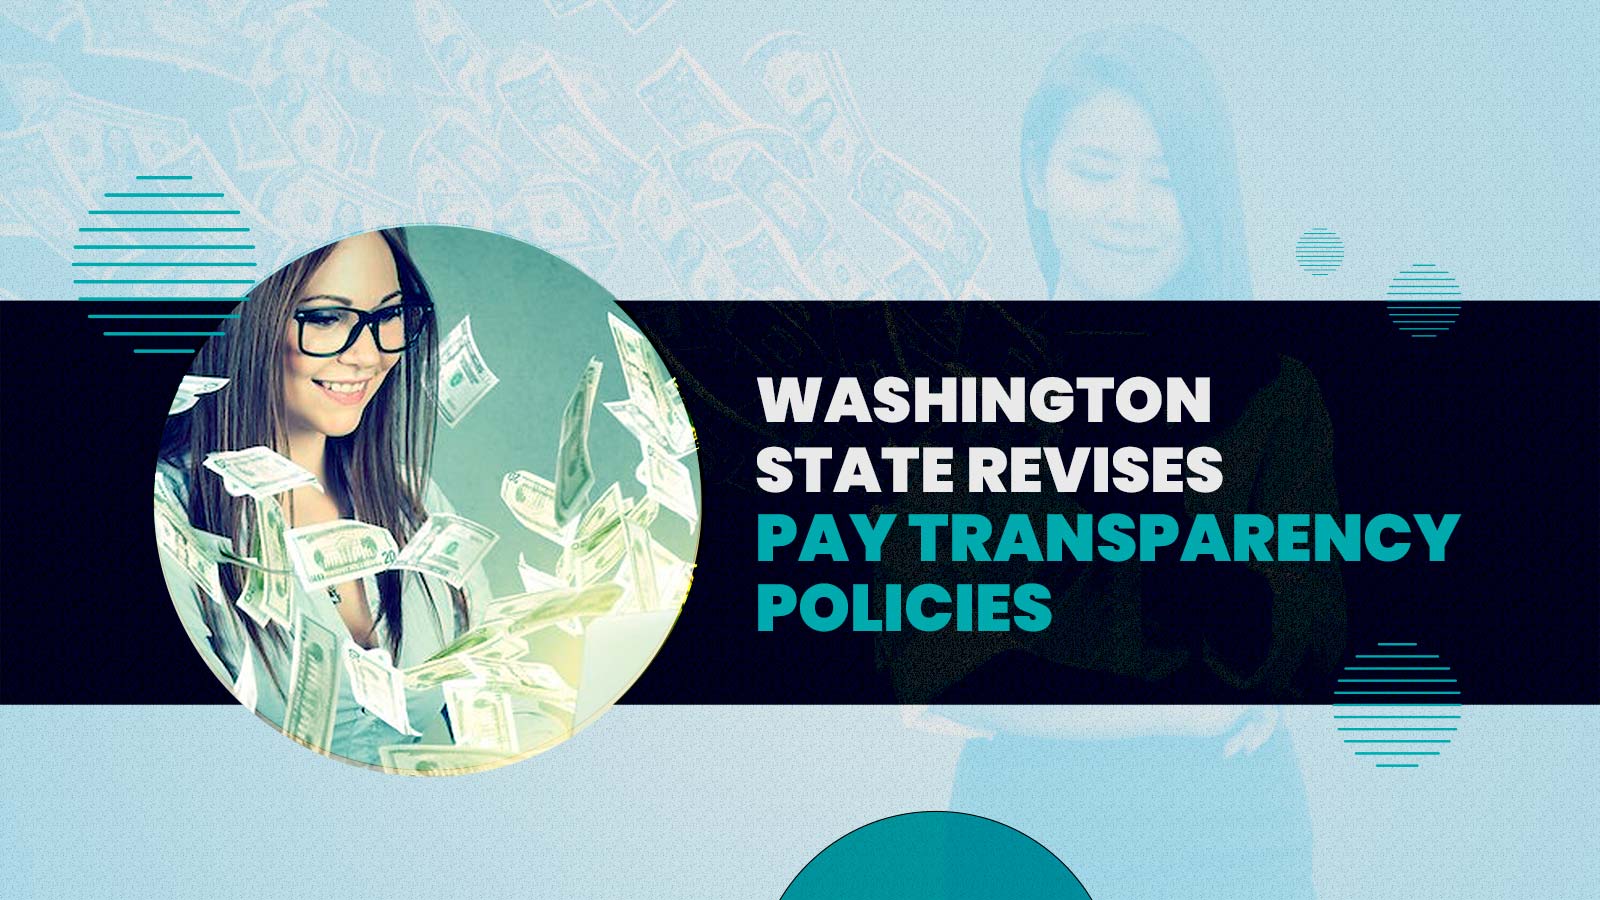 Washington State Revises Pay Transparency Policies